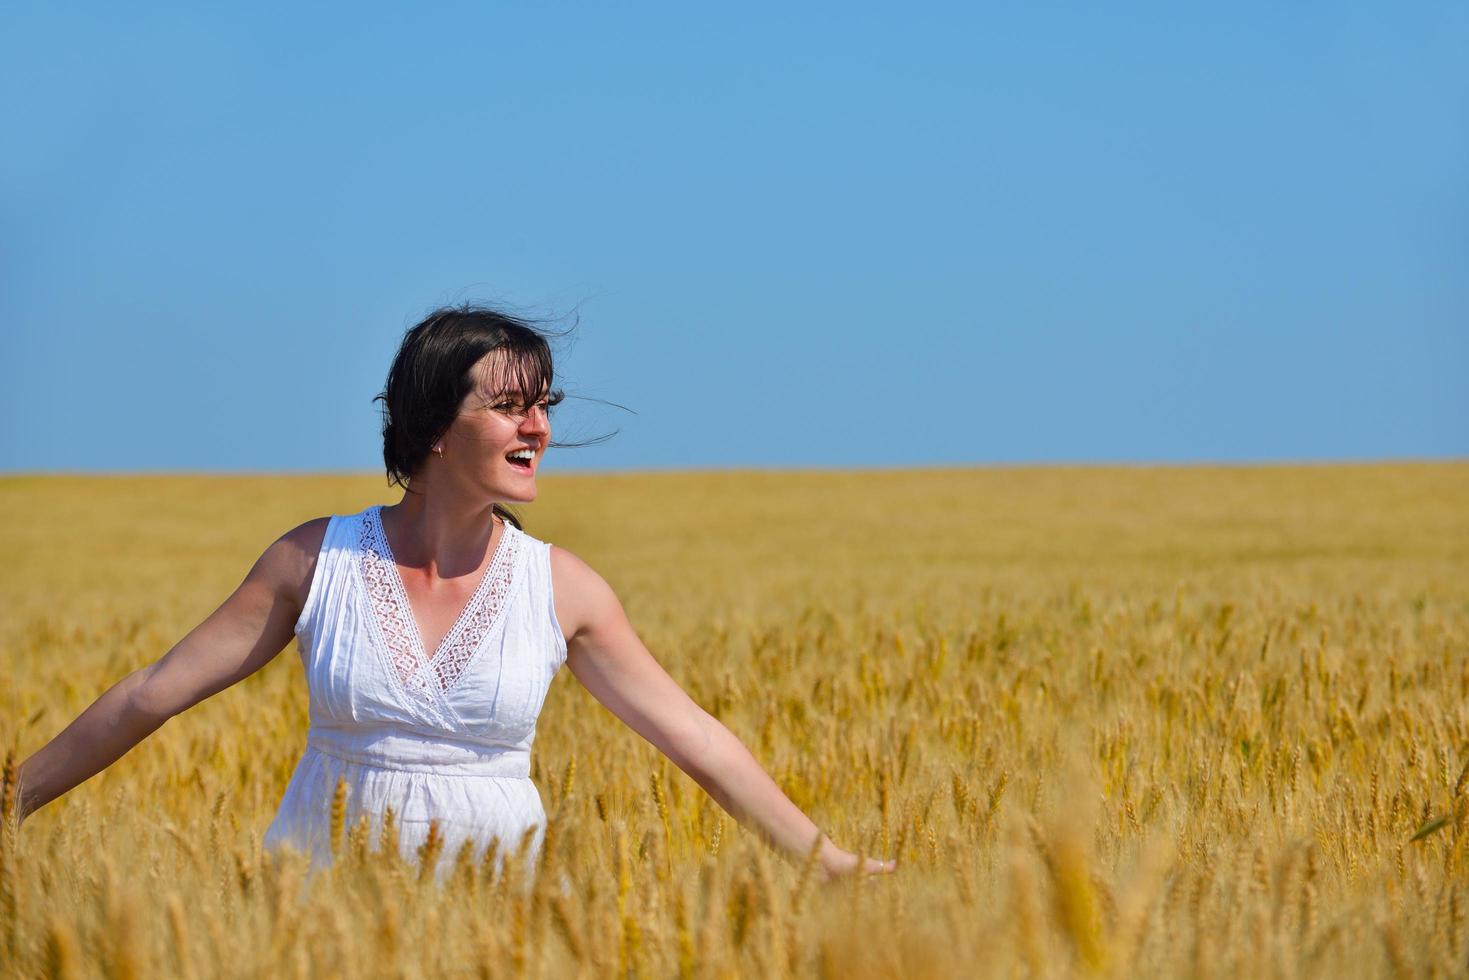 young woman in wheat field at summer photo